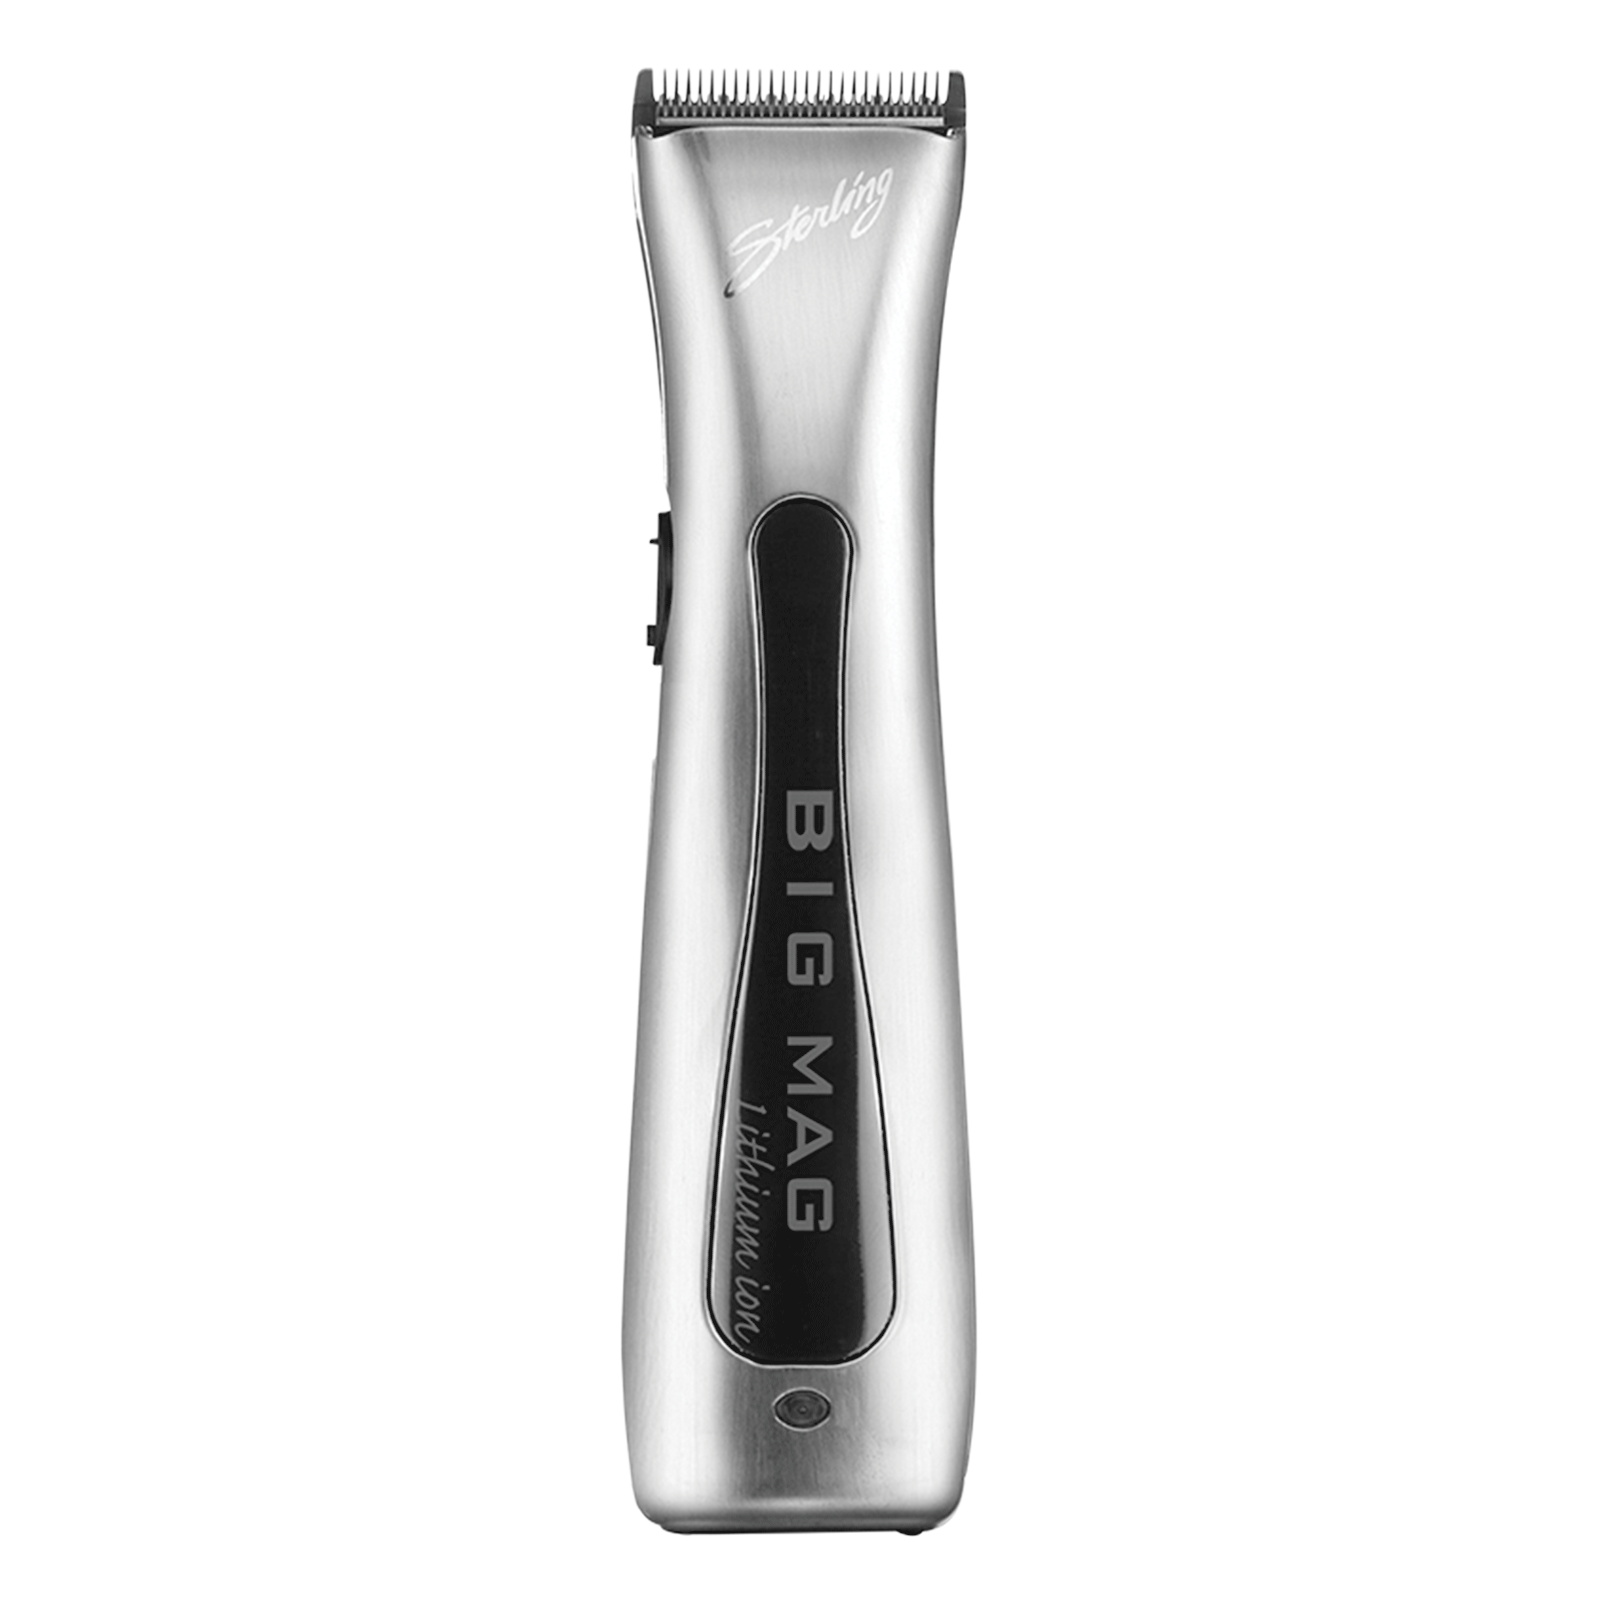 sterling cordless trimmer